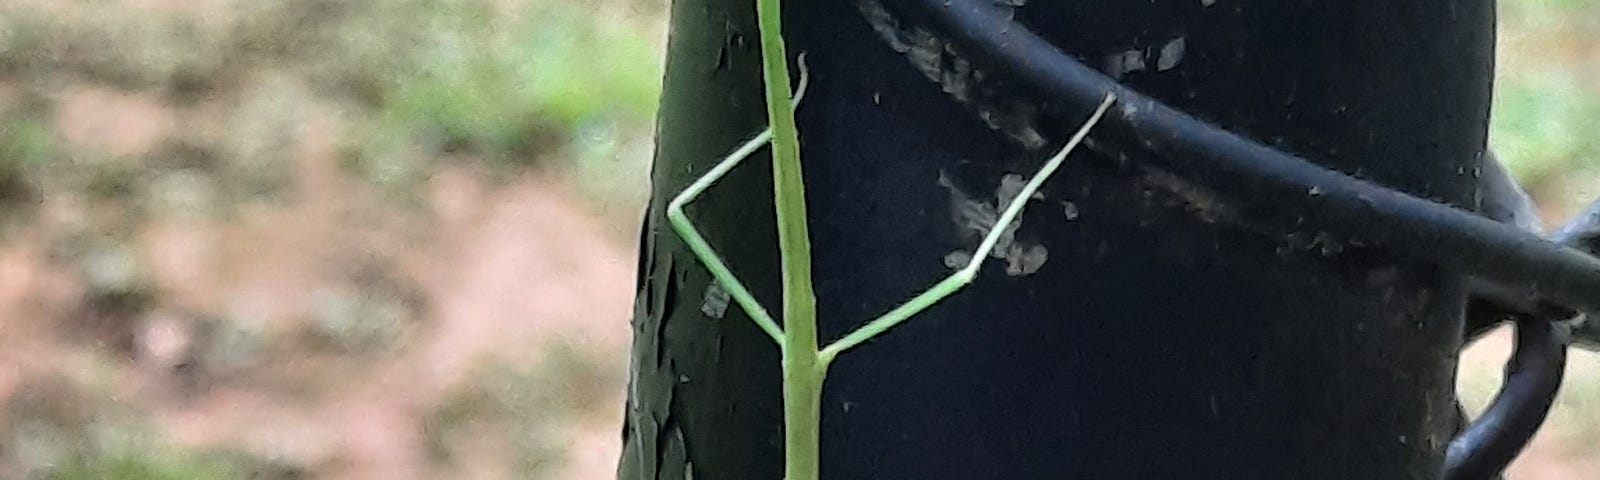 photo of insect some call a “walking stick” because of it’s long narrow shape